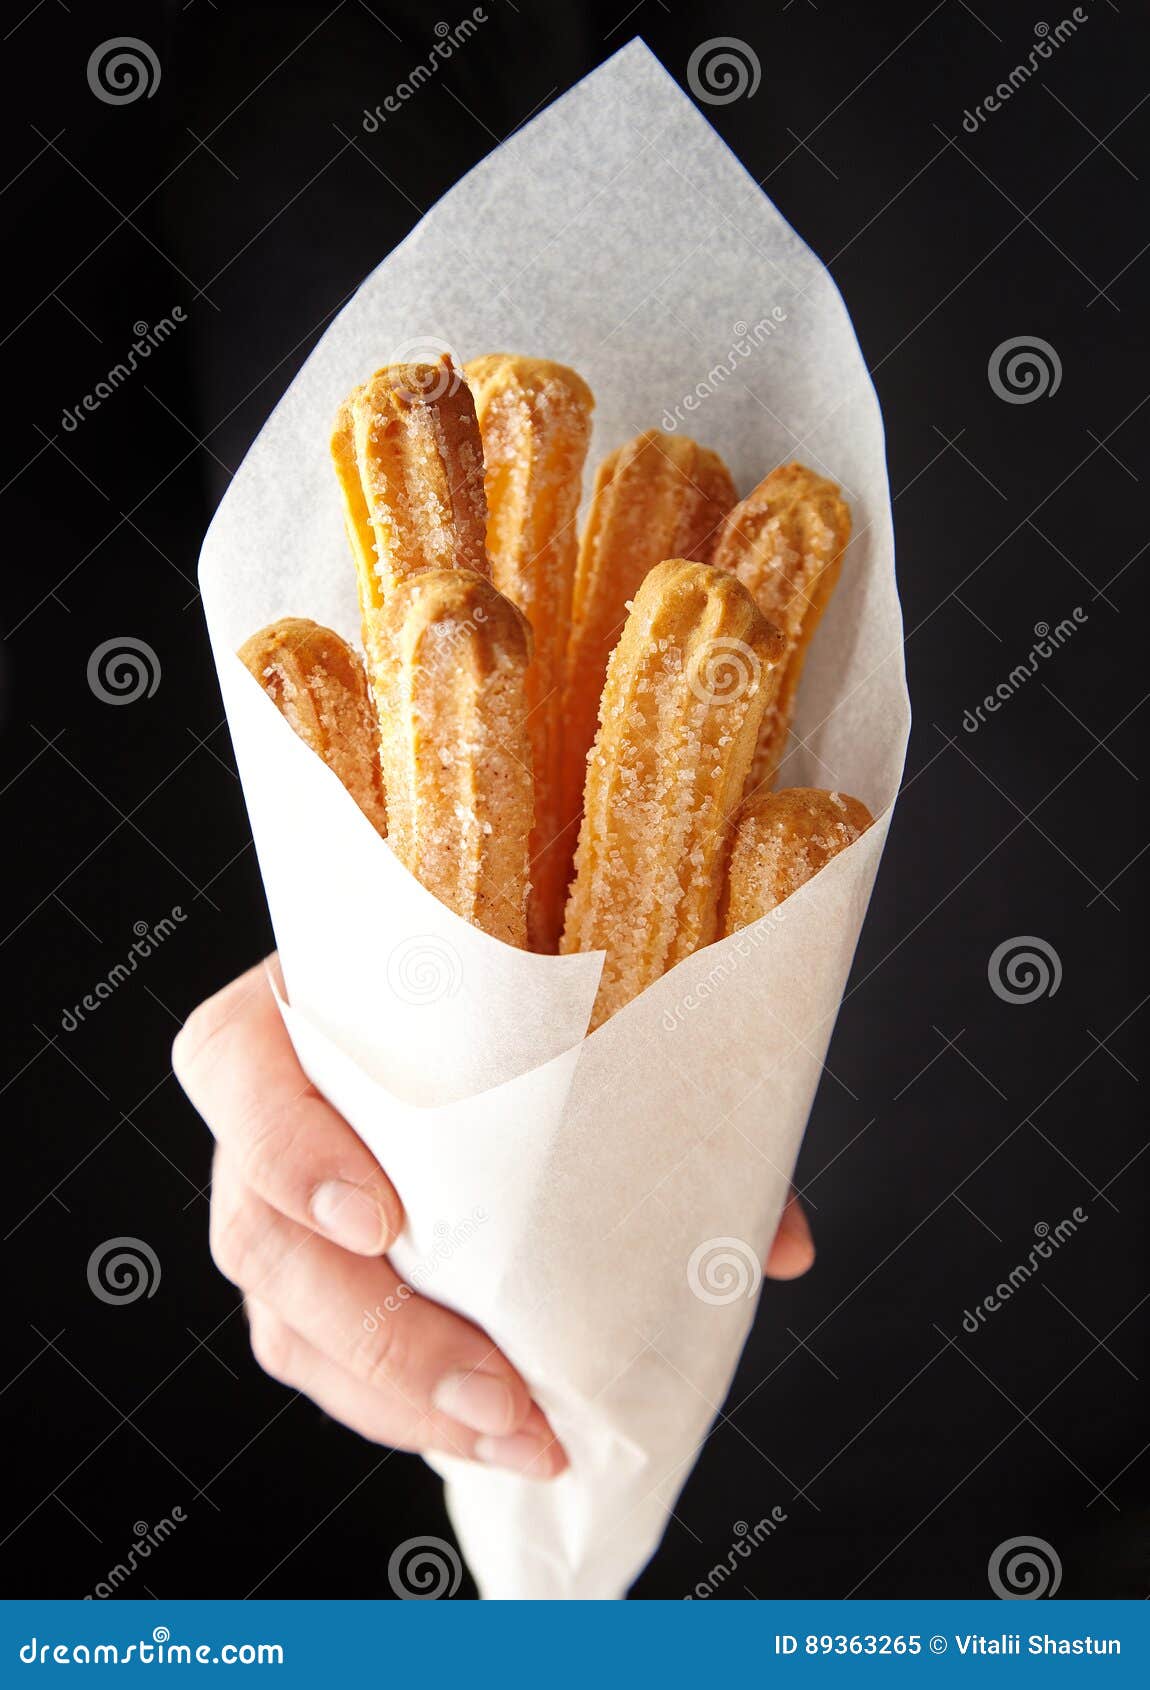 churros traditional spain or mexican street fast food baked sweet dough snack in hand